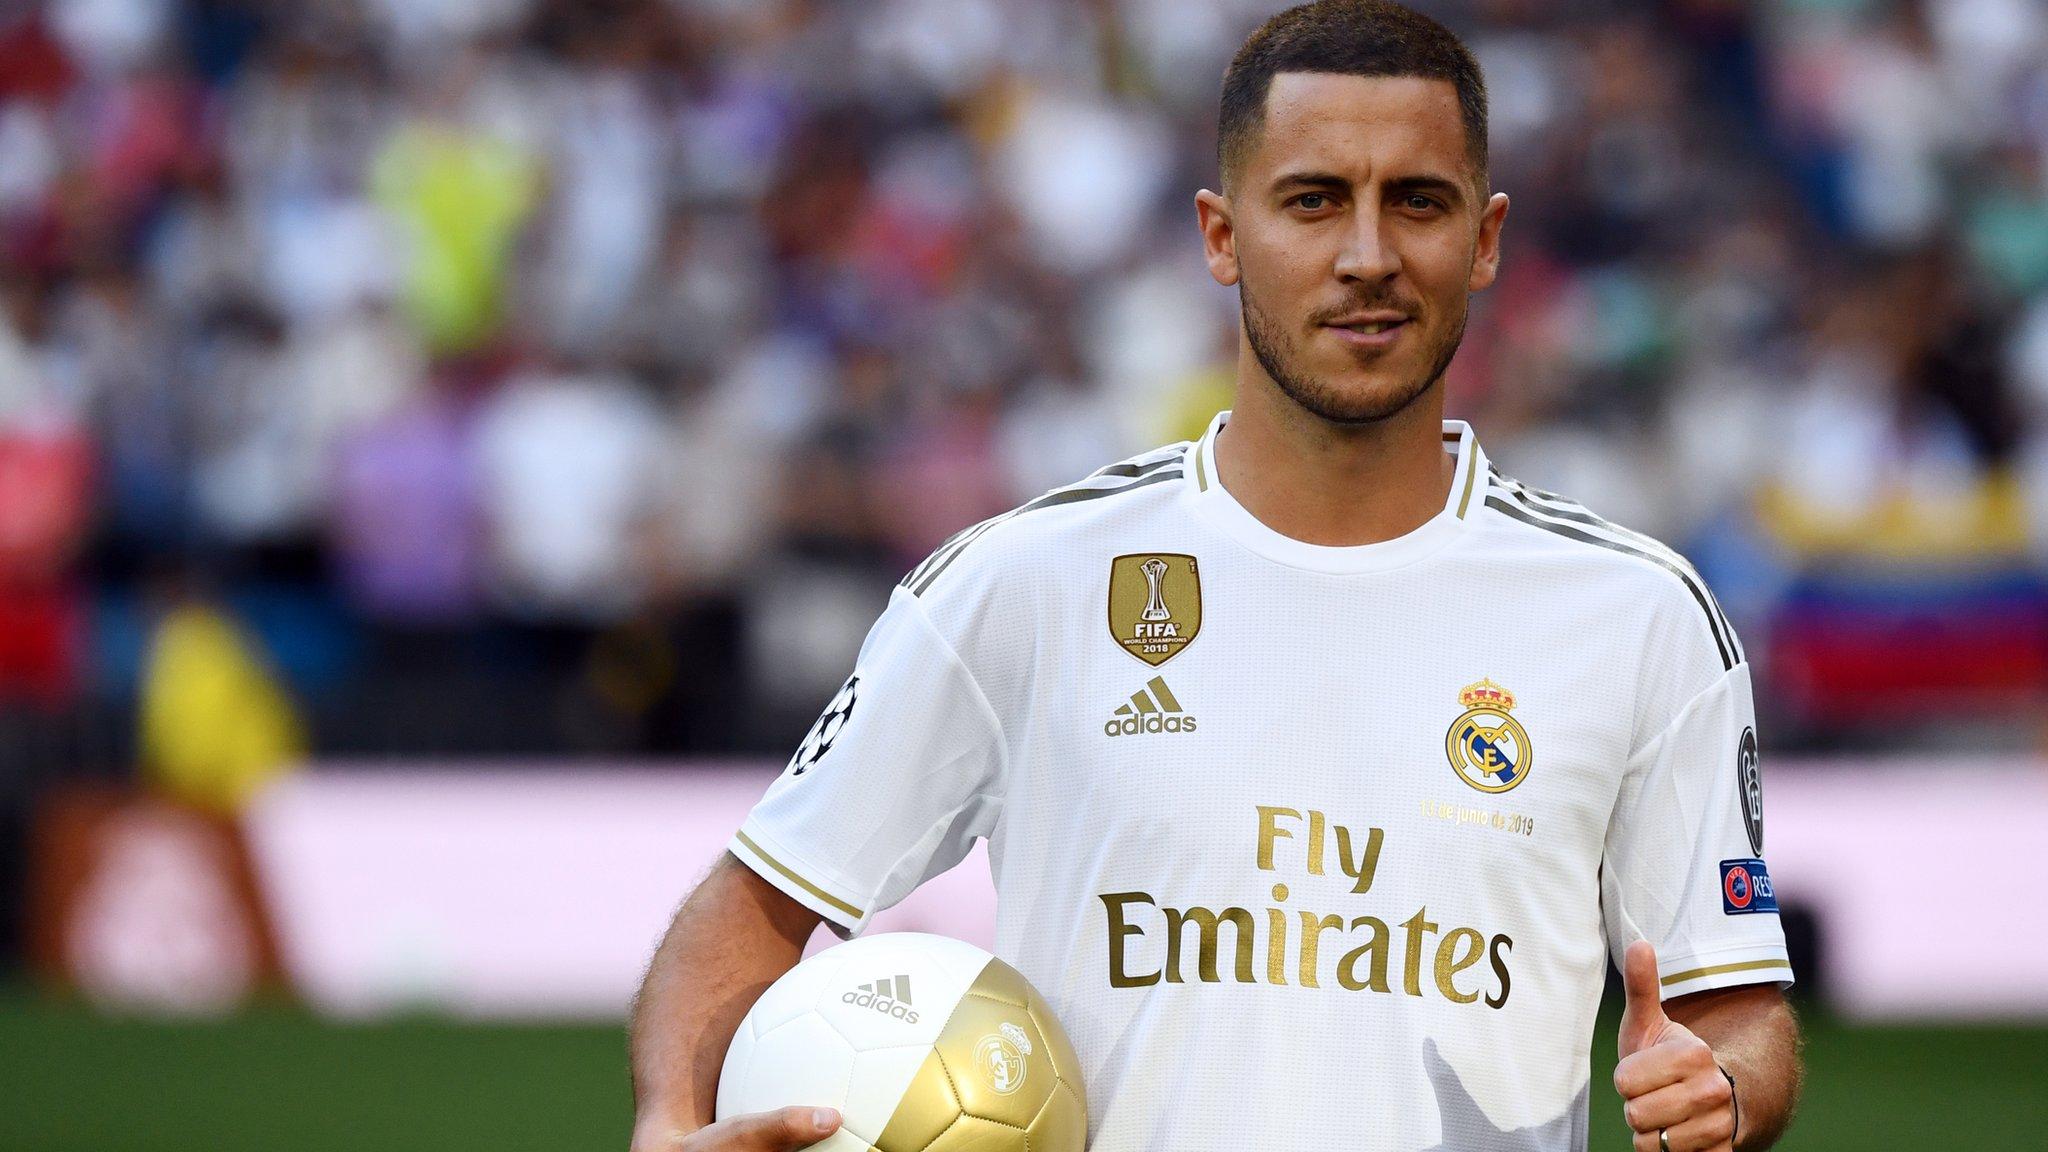 Eden Hazard: Real Madrid's new signing presented in front